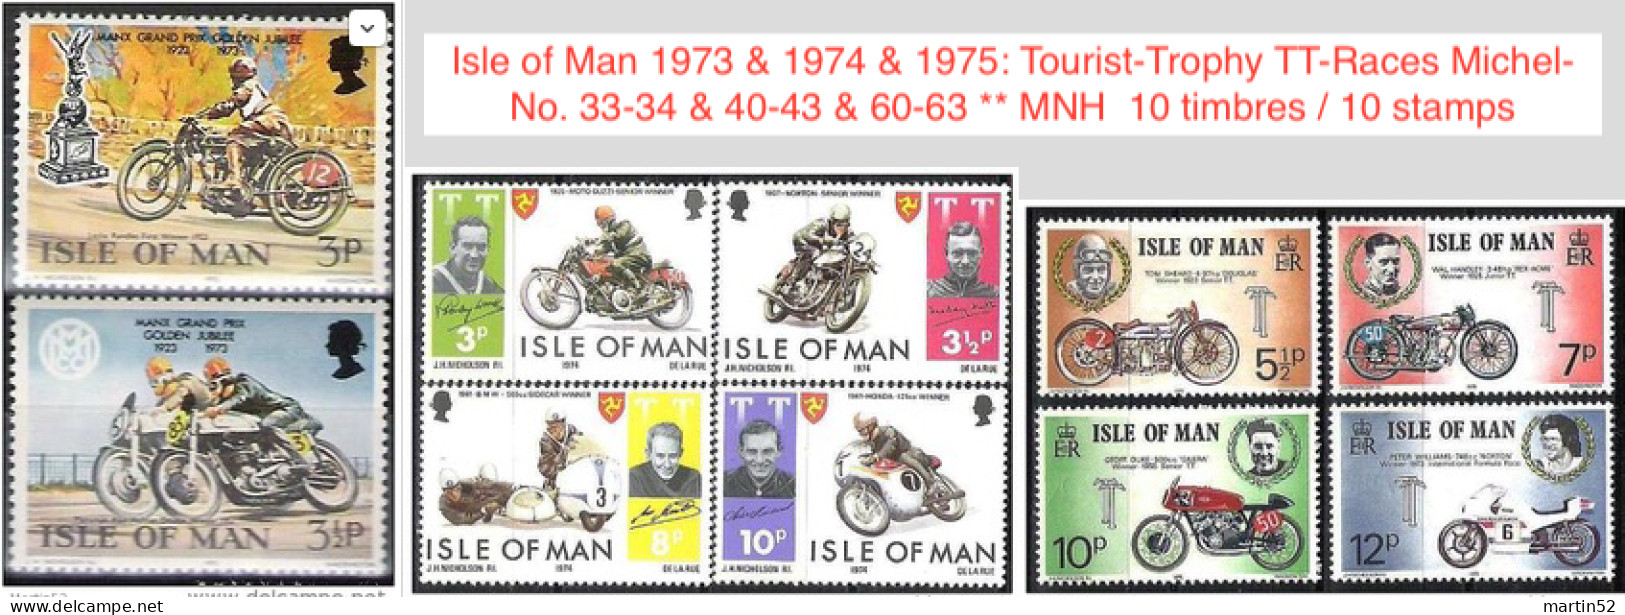 Isle Of Man 1973 & 1974 & 1975: Tourist-Trophy TT-Races Michel-No. 33-34 & 40-43 & 60-63 ** MNH  10 Timbres / 10 Stamps - Moto